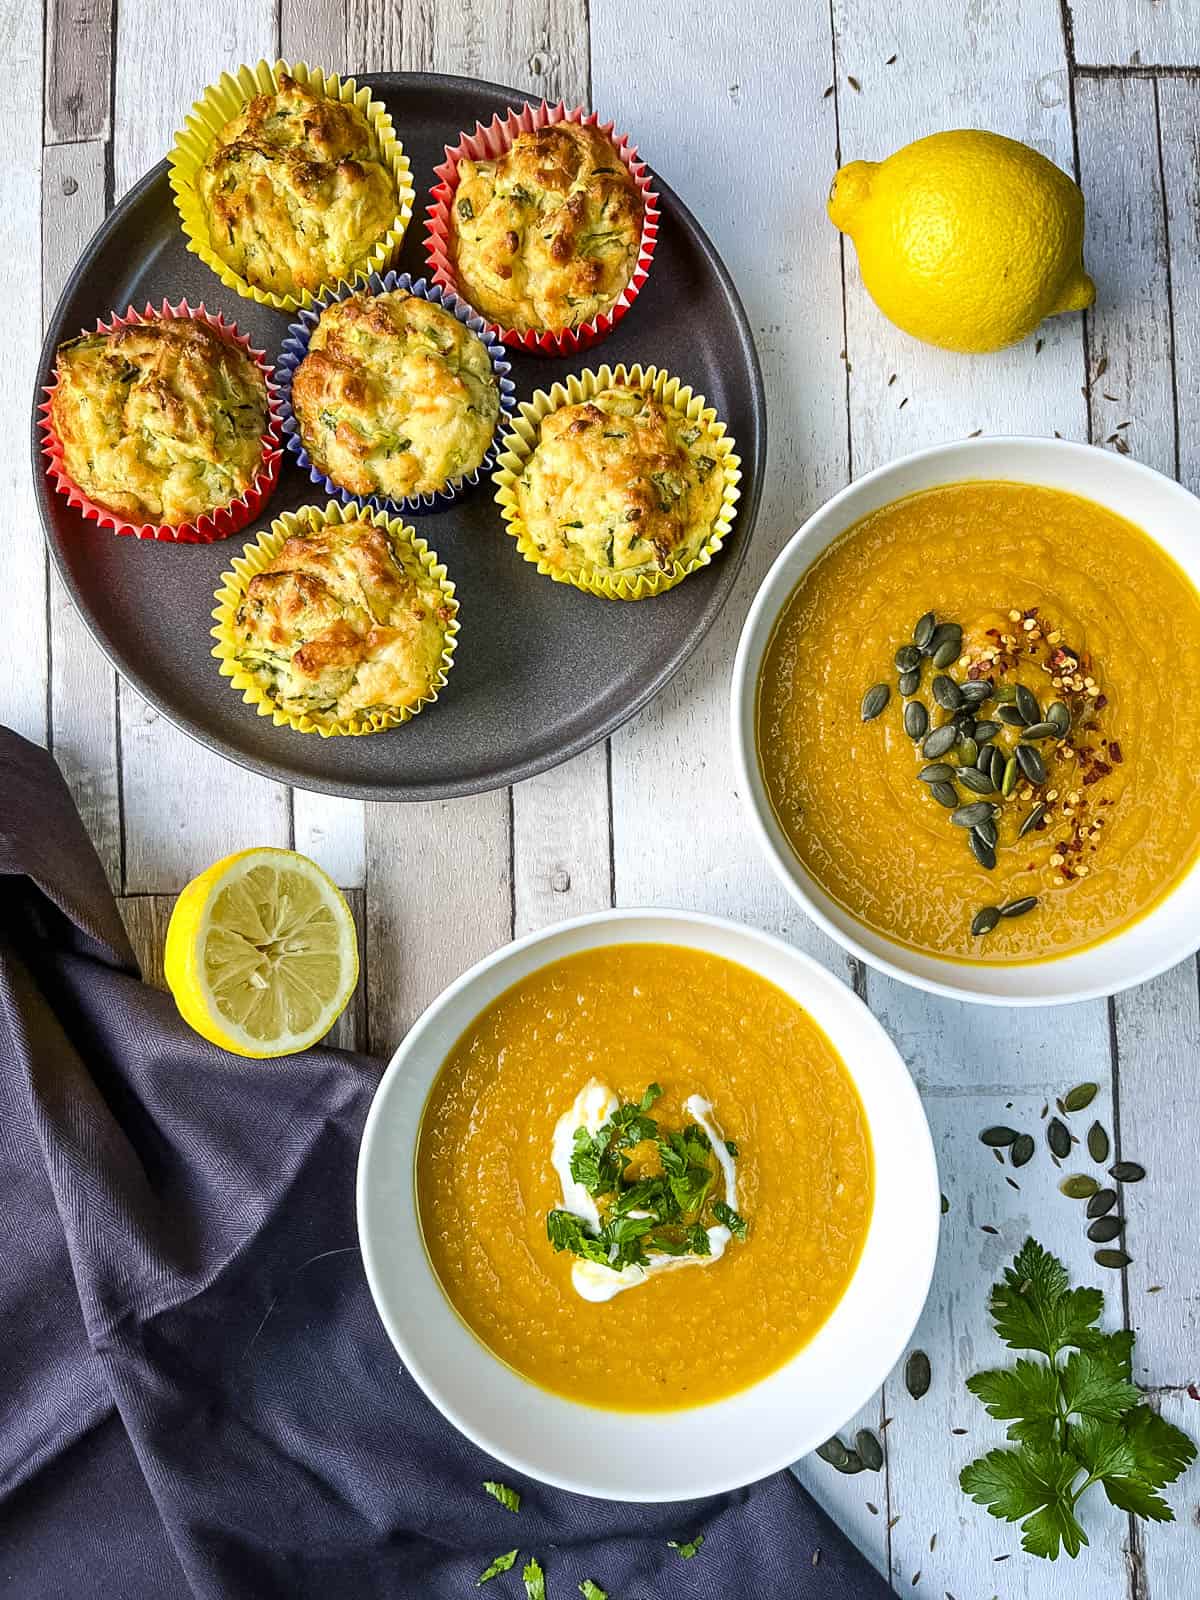 bowls of carrot and cumin soup served with a side of cheese and courgette muffins.